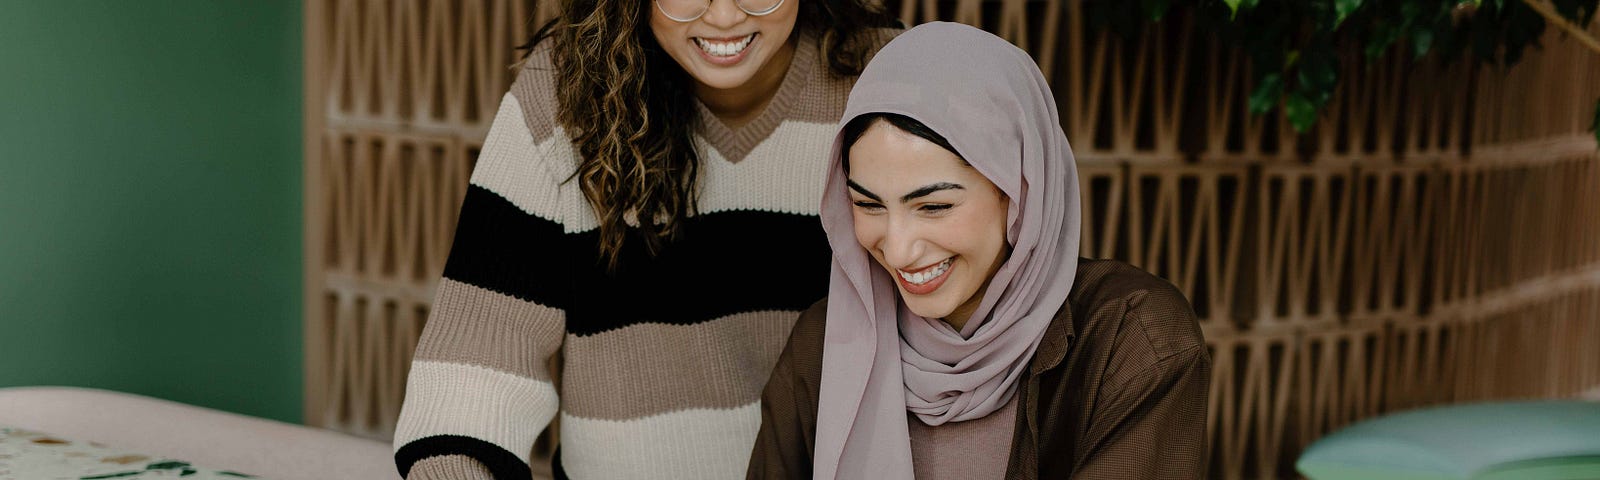 An Asian woman with curly brown hair, left, wears a striped brown, beige, and black sweater. From where she stands, she looks down at a notebook and smiles. A woman in a light purple hijab, right, wears a brown jacket and smiles as she looks at a tablet. The two are at a white table with various color splotches.